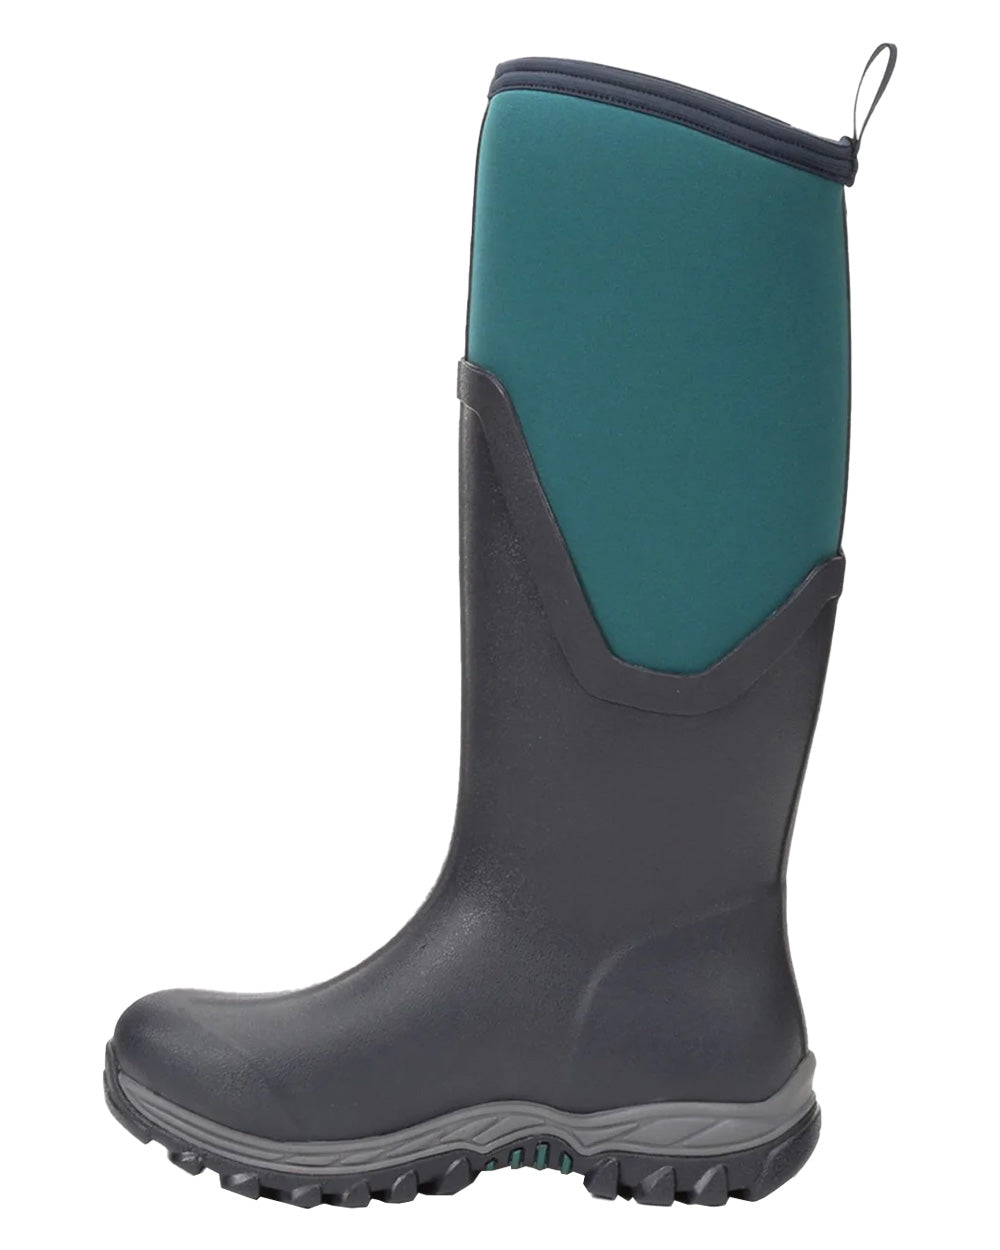 Navy/Spruce coloured Muck Boots Womens Artic Sport II Tall Wellingtons on White background 